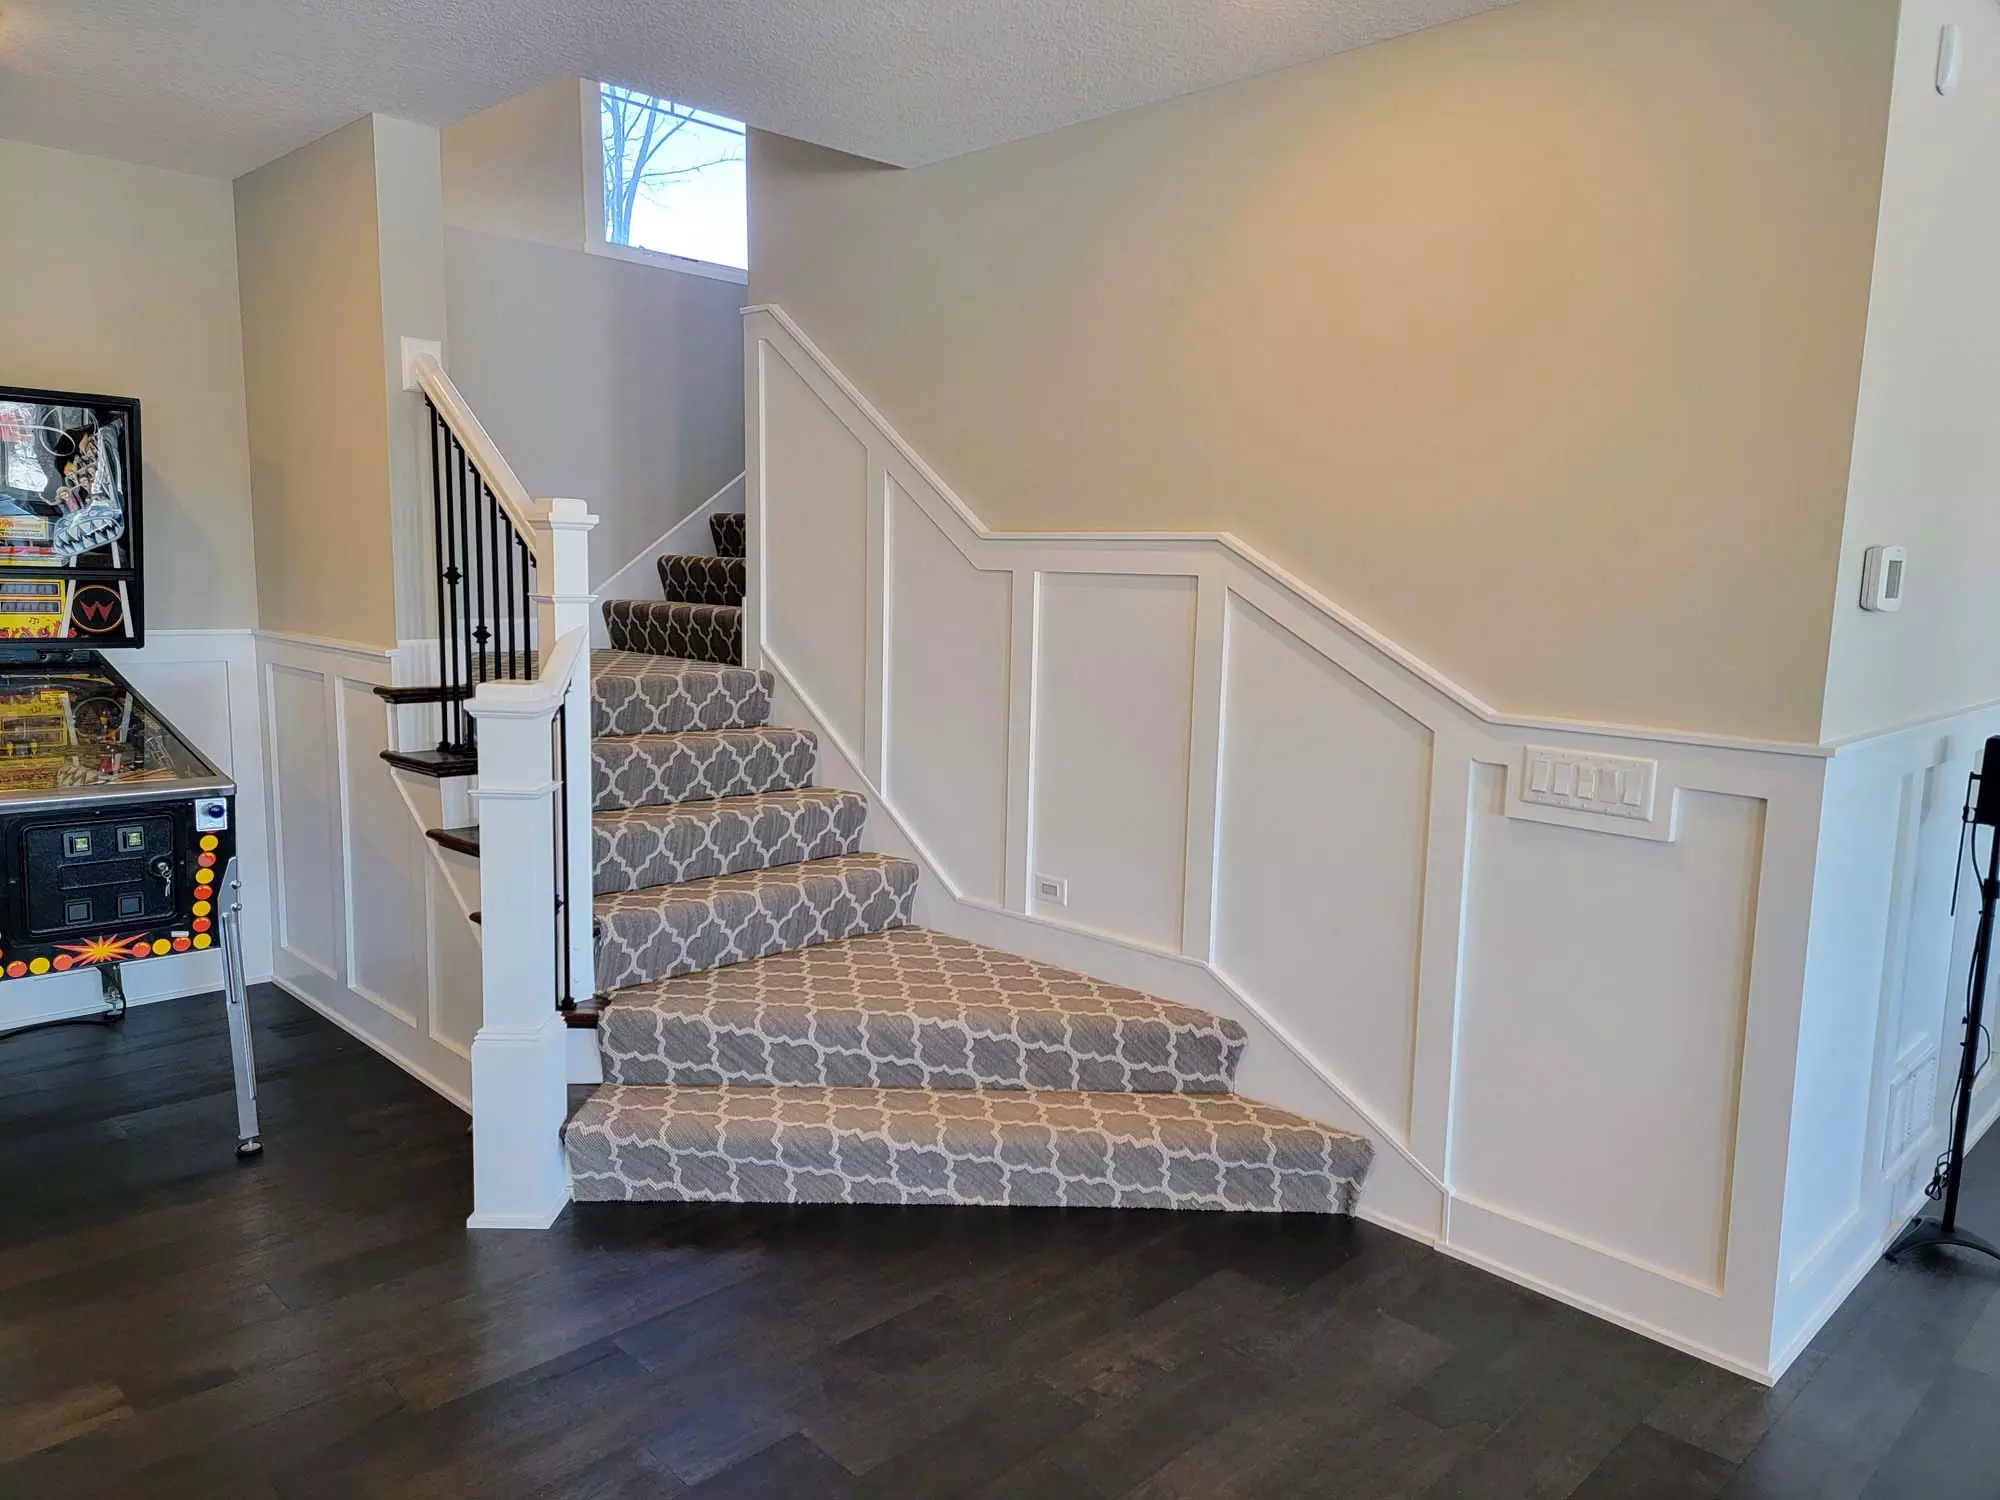 Zigzag staircase with Wainscoting